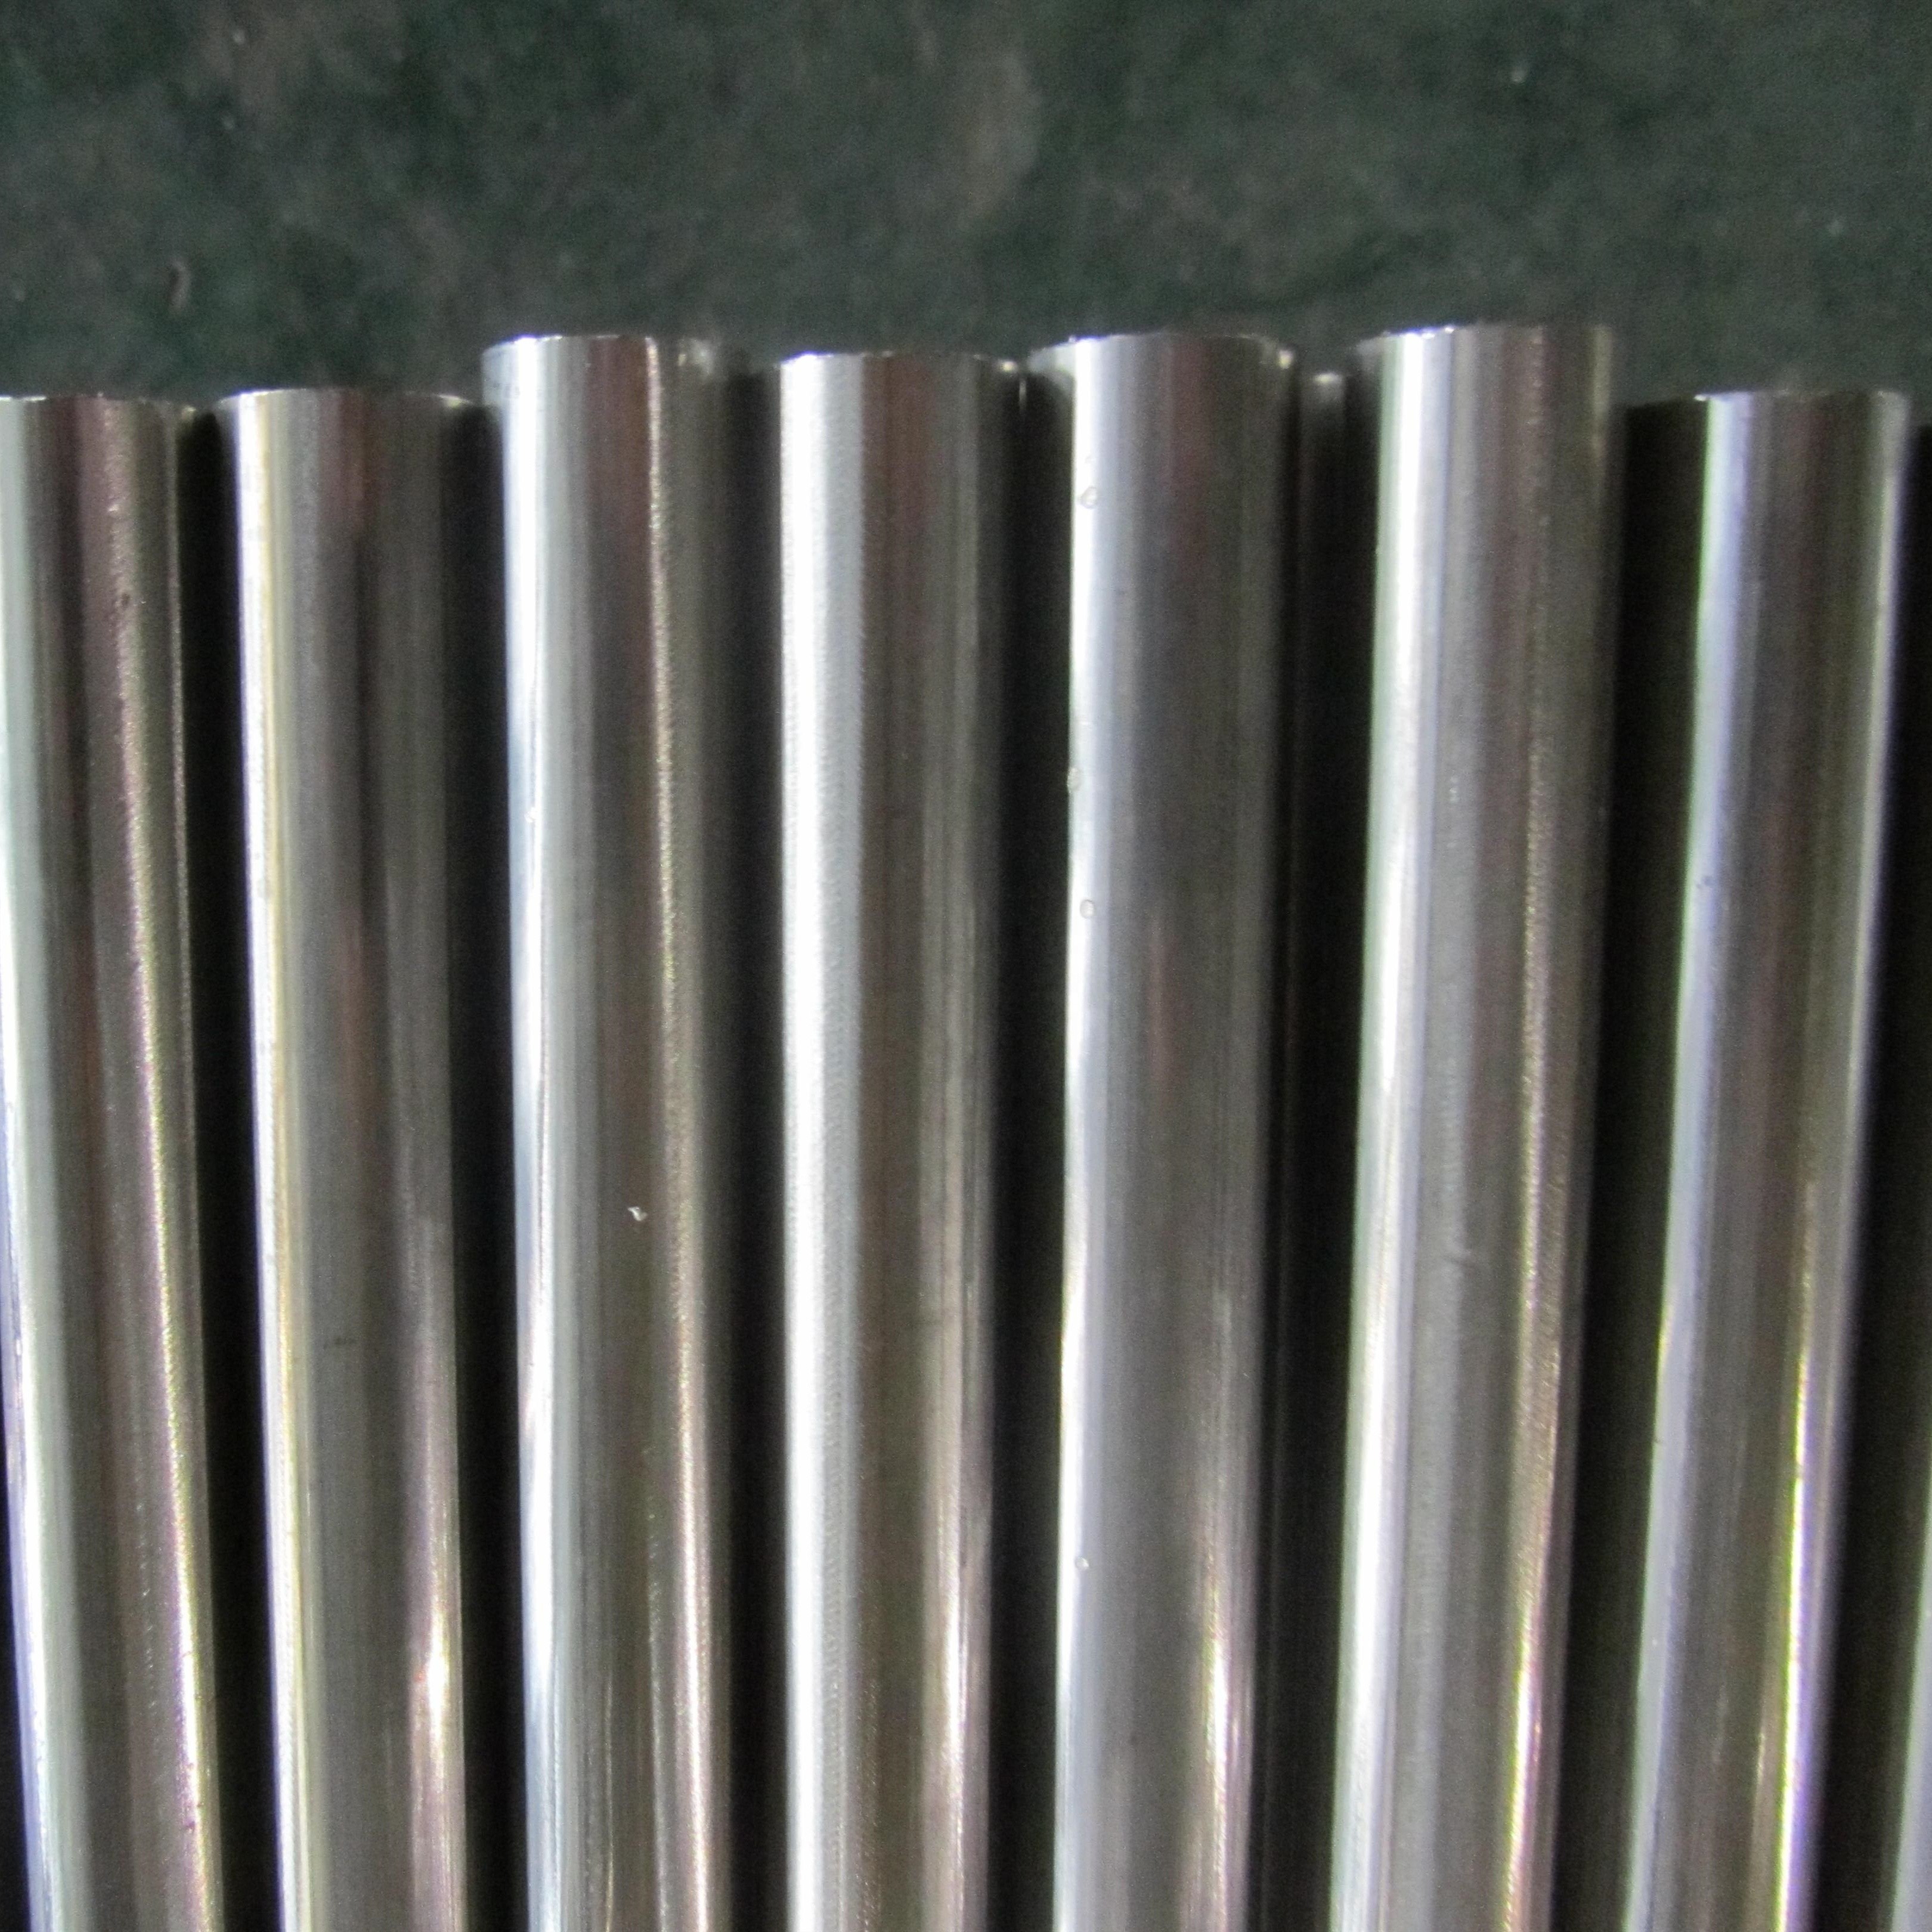 304L 316L TP316Ti S31803 904L 310S Stainless Steel Welded Pipe Tube ASTM A249 ASTM A269 ASTM A789